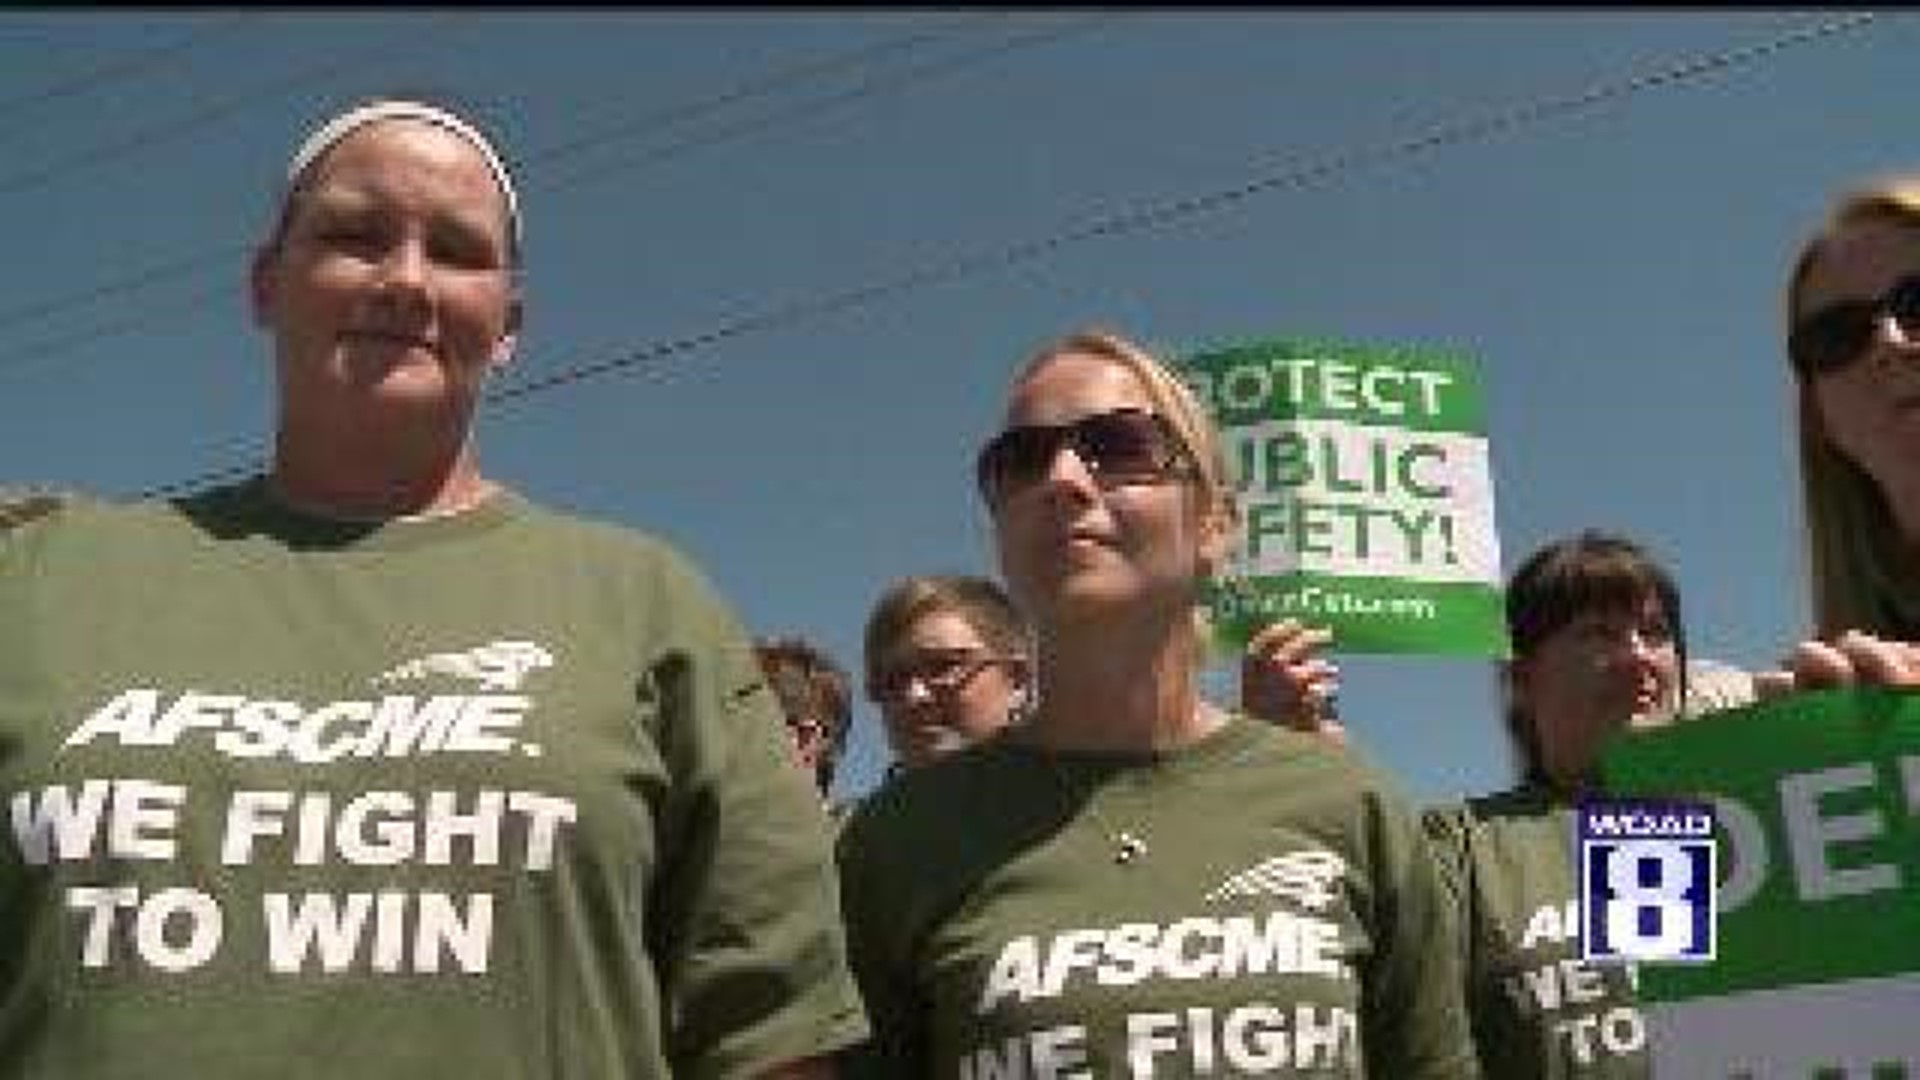 AFSCME Contract Agreement